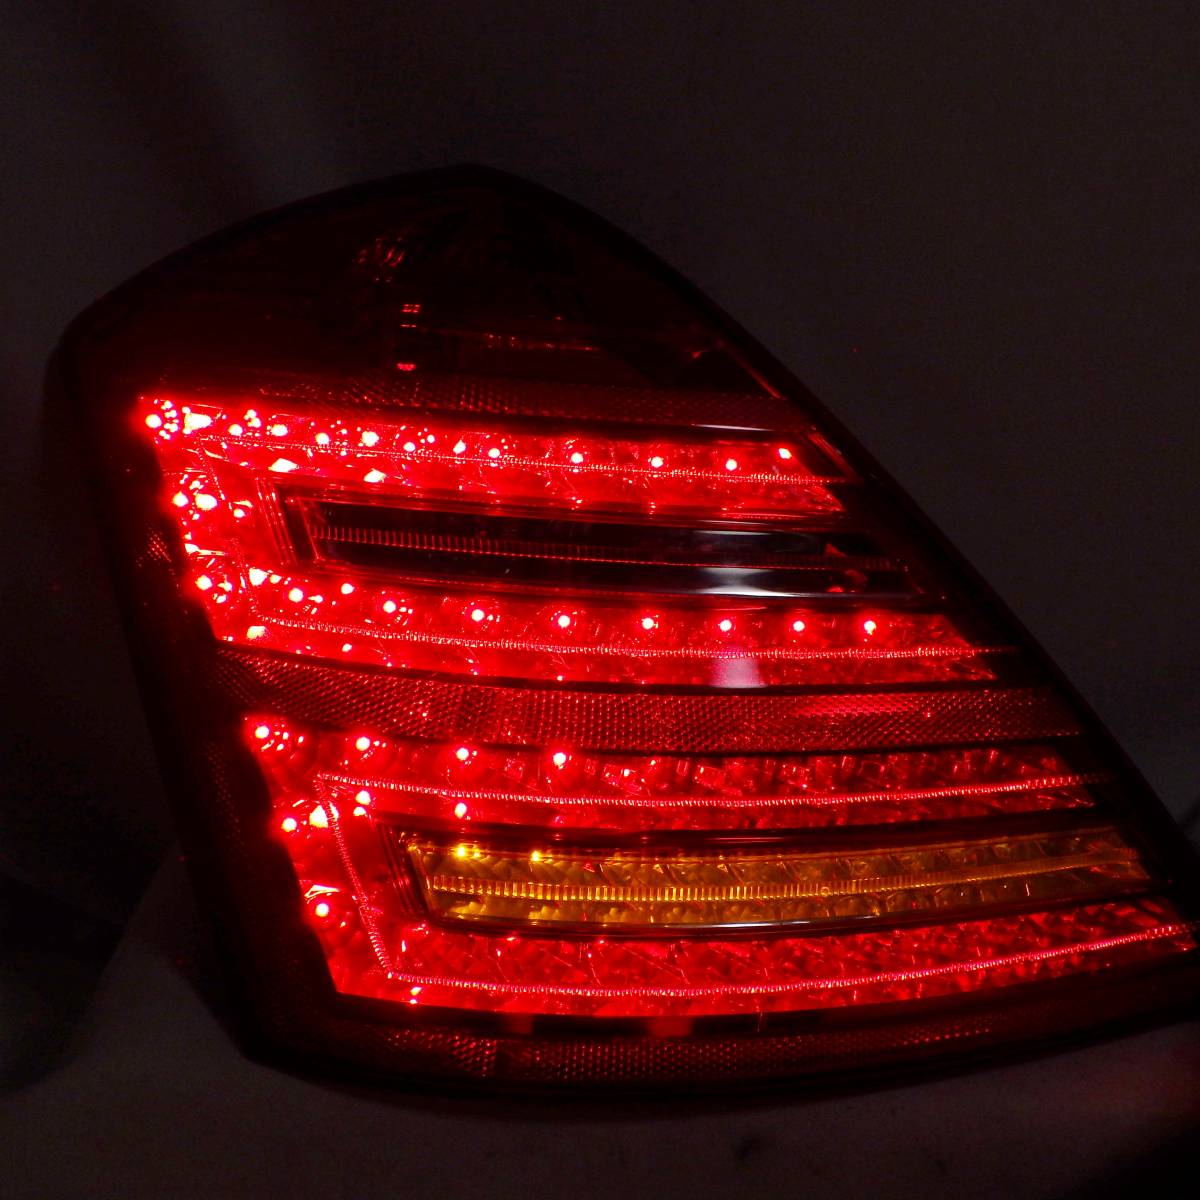  lighting verification settled vehicle inspection correspondence Mercedes Benz S Class W221 for previous term tail lamp tale lense latter term look S350/S500/S550/S600/AMG S63/AMG S65